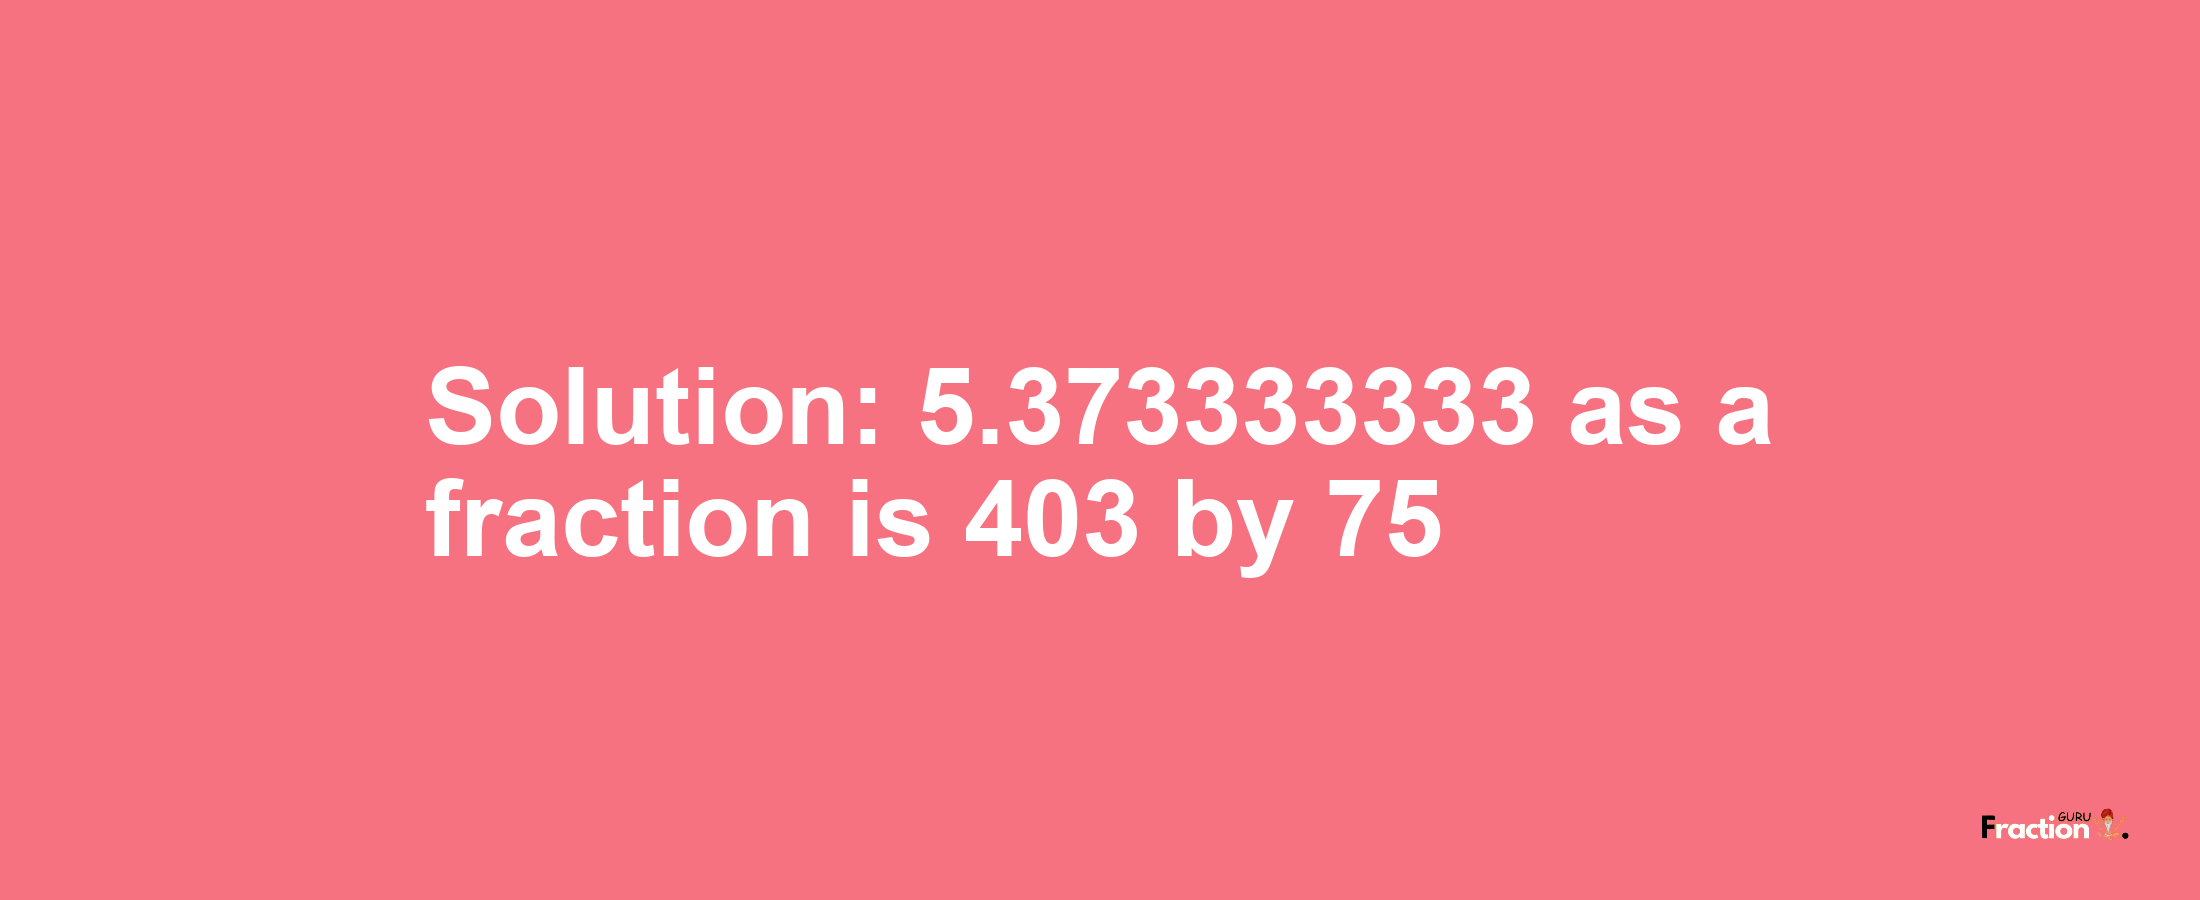 Solution:5.373333333 as a fraction is 403/75